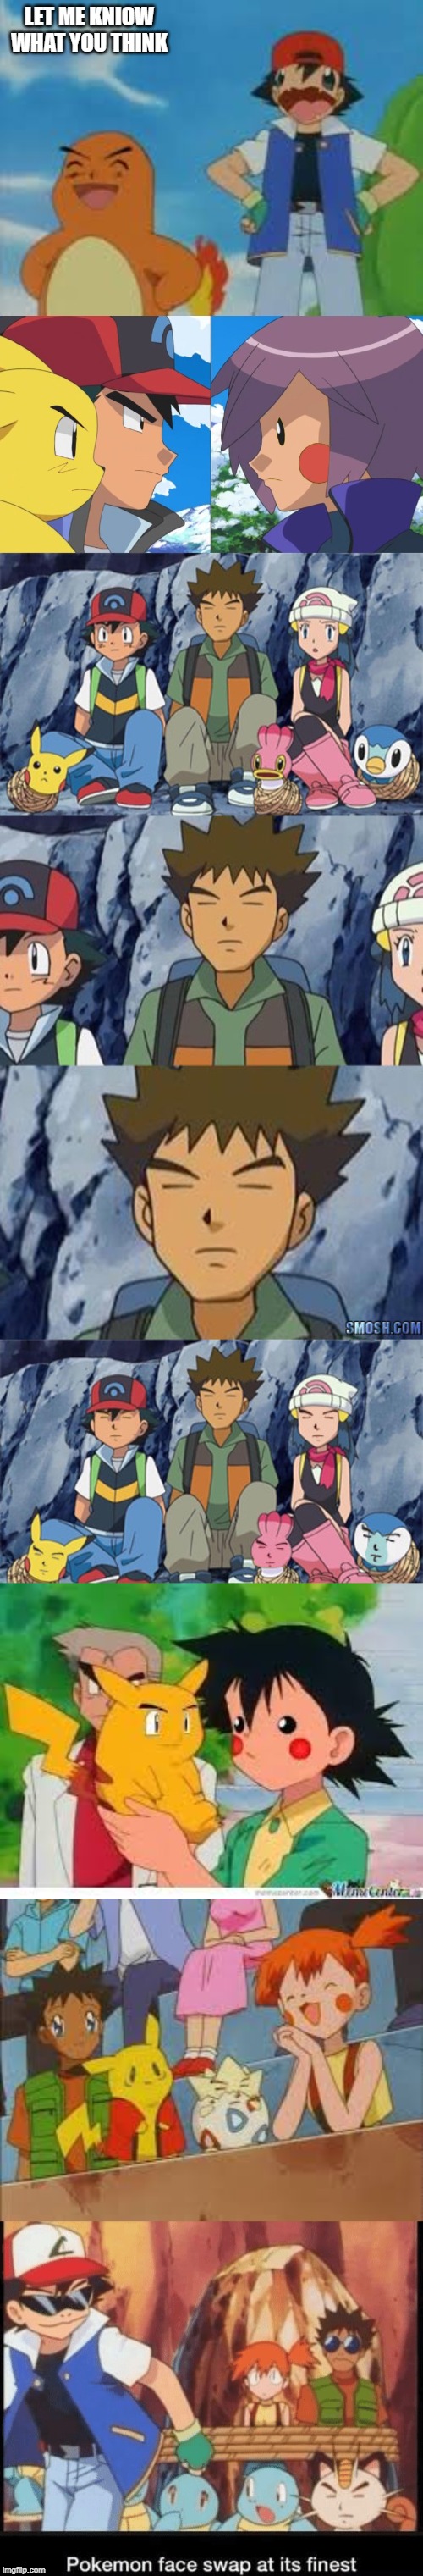 pokemon face swap | LET ME KNIOW WHAT YOU THINK | image tagged in pokemon | made w/ Imgflip meme maker